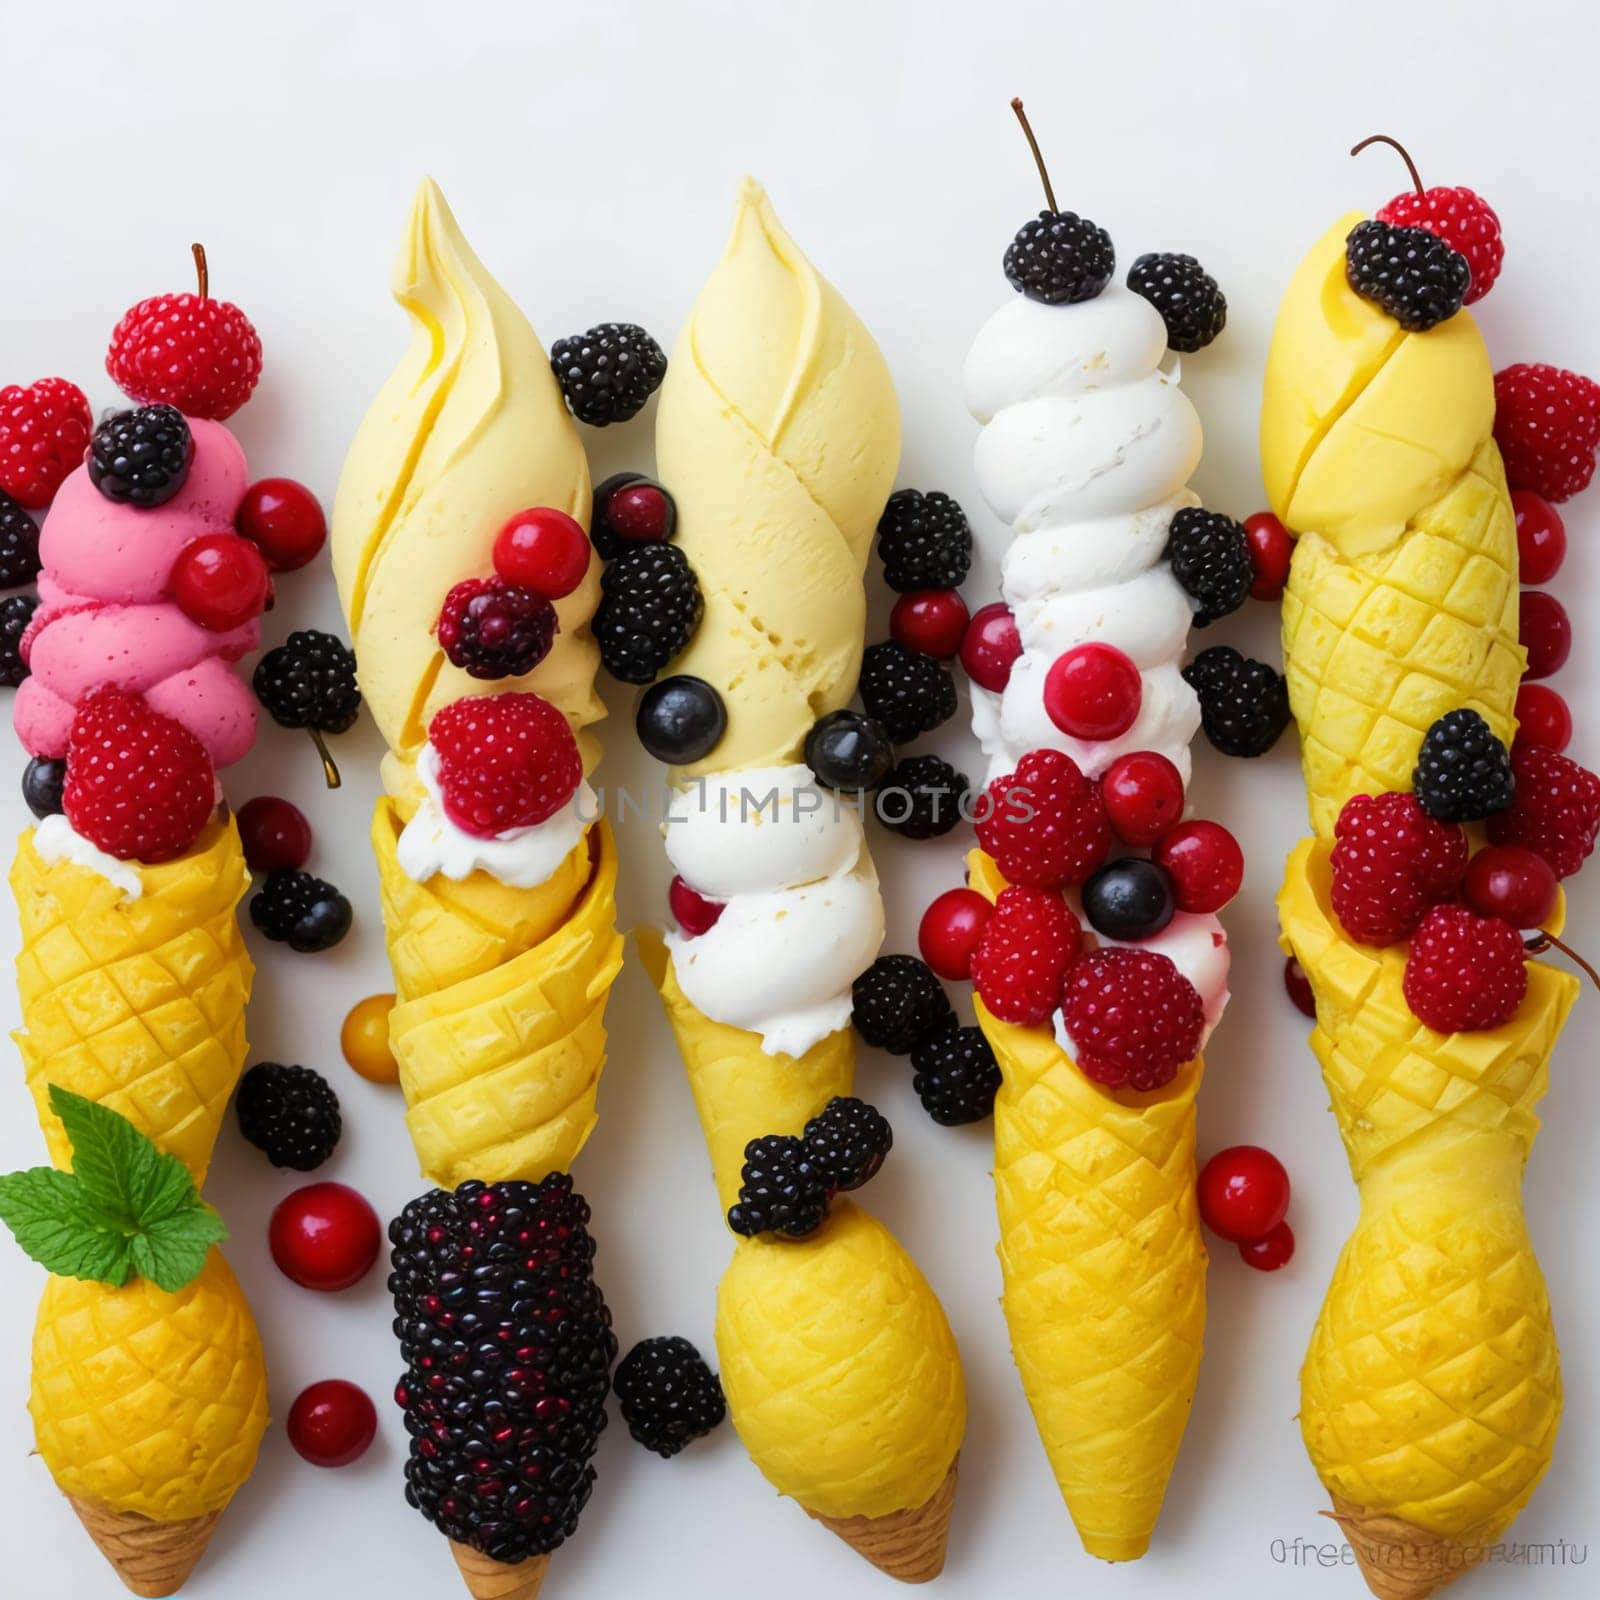 Different flavors of ice cream cones with frozen mango, pineapple, red and black currant berries on a white background. Summer creative concept